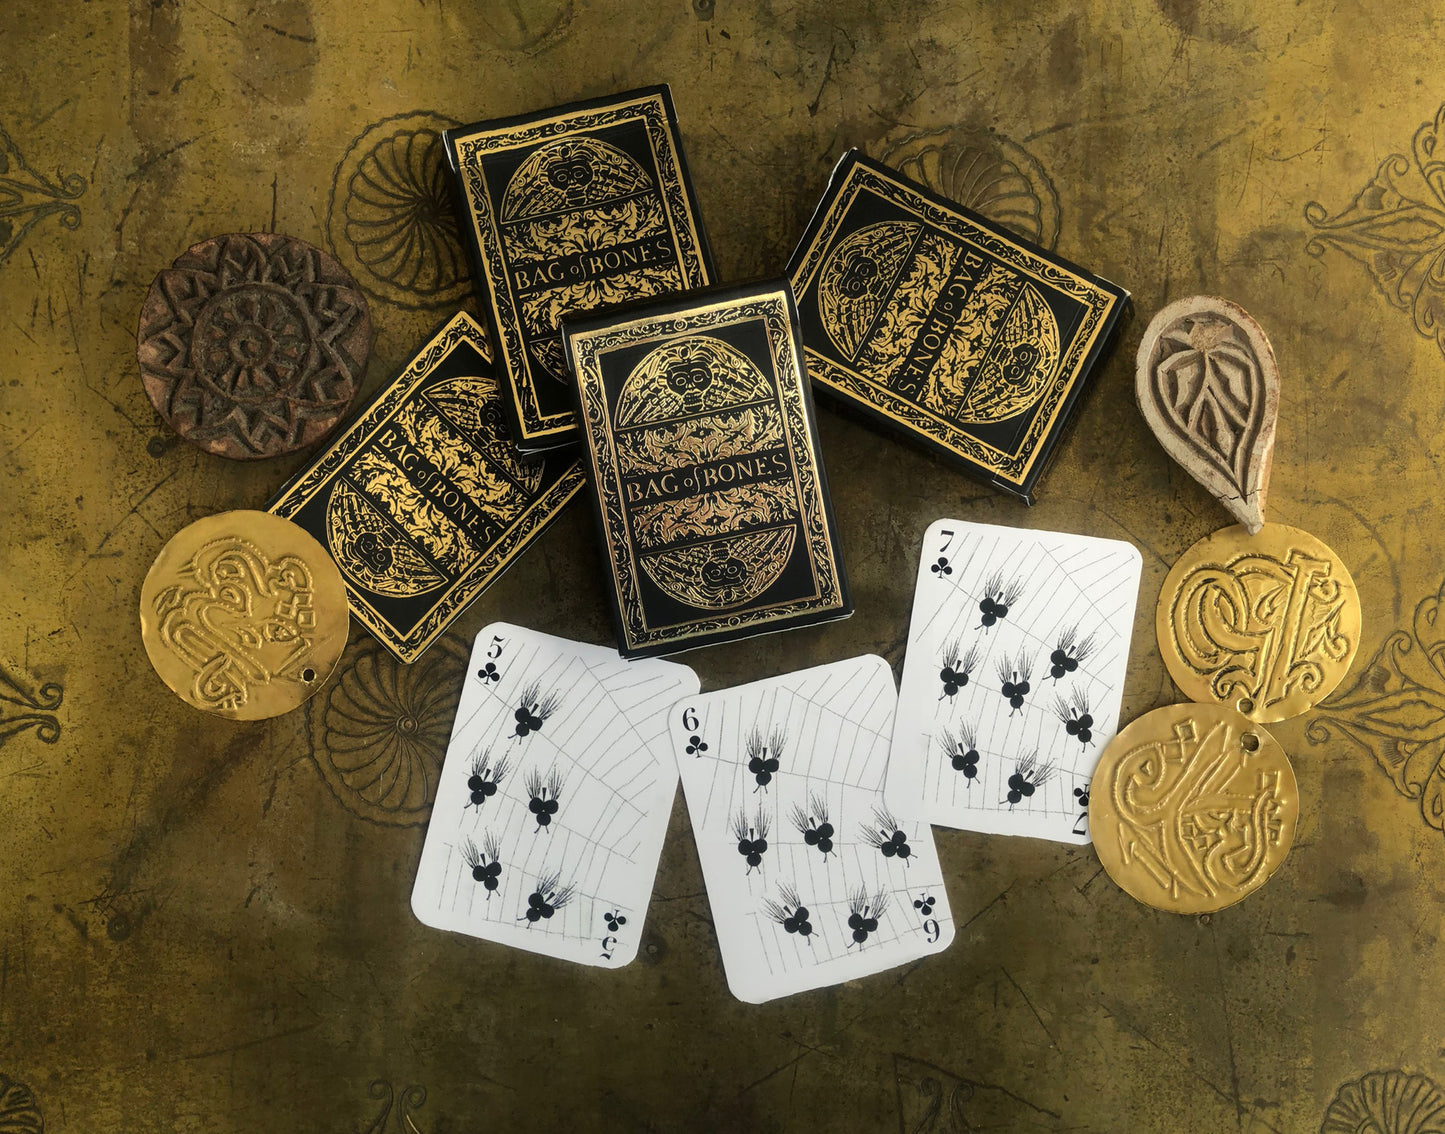 Bag of Bones Playing Cards - Premium Gold Edition